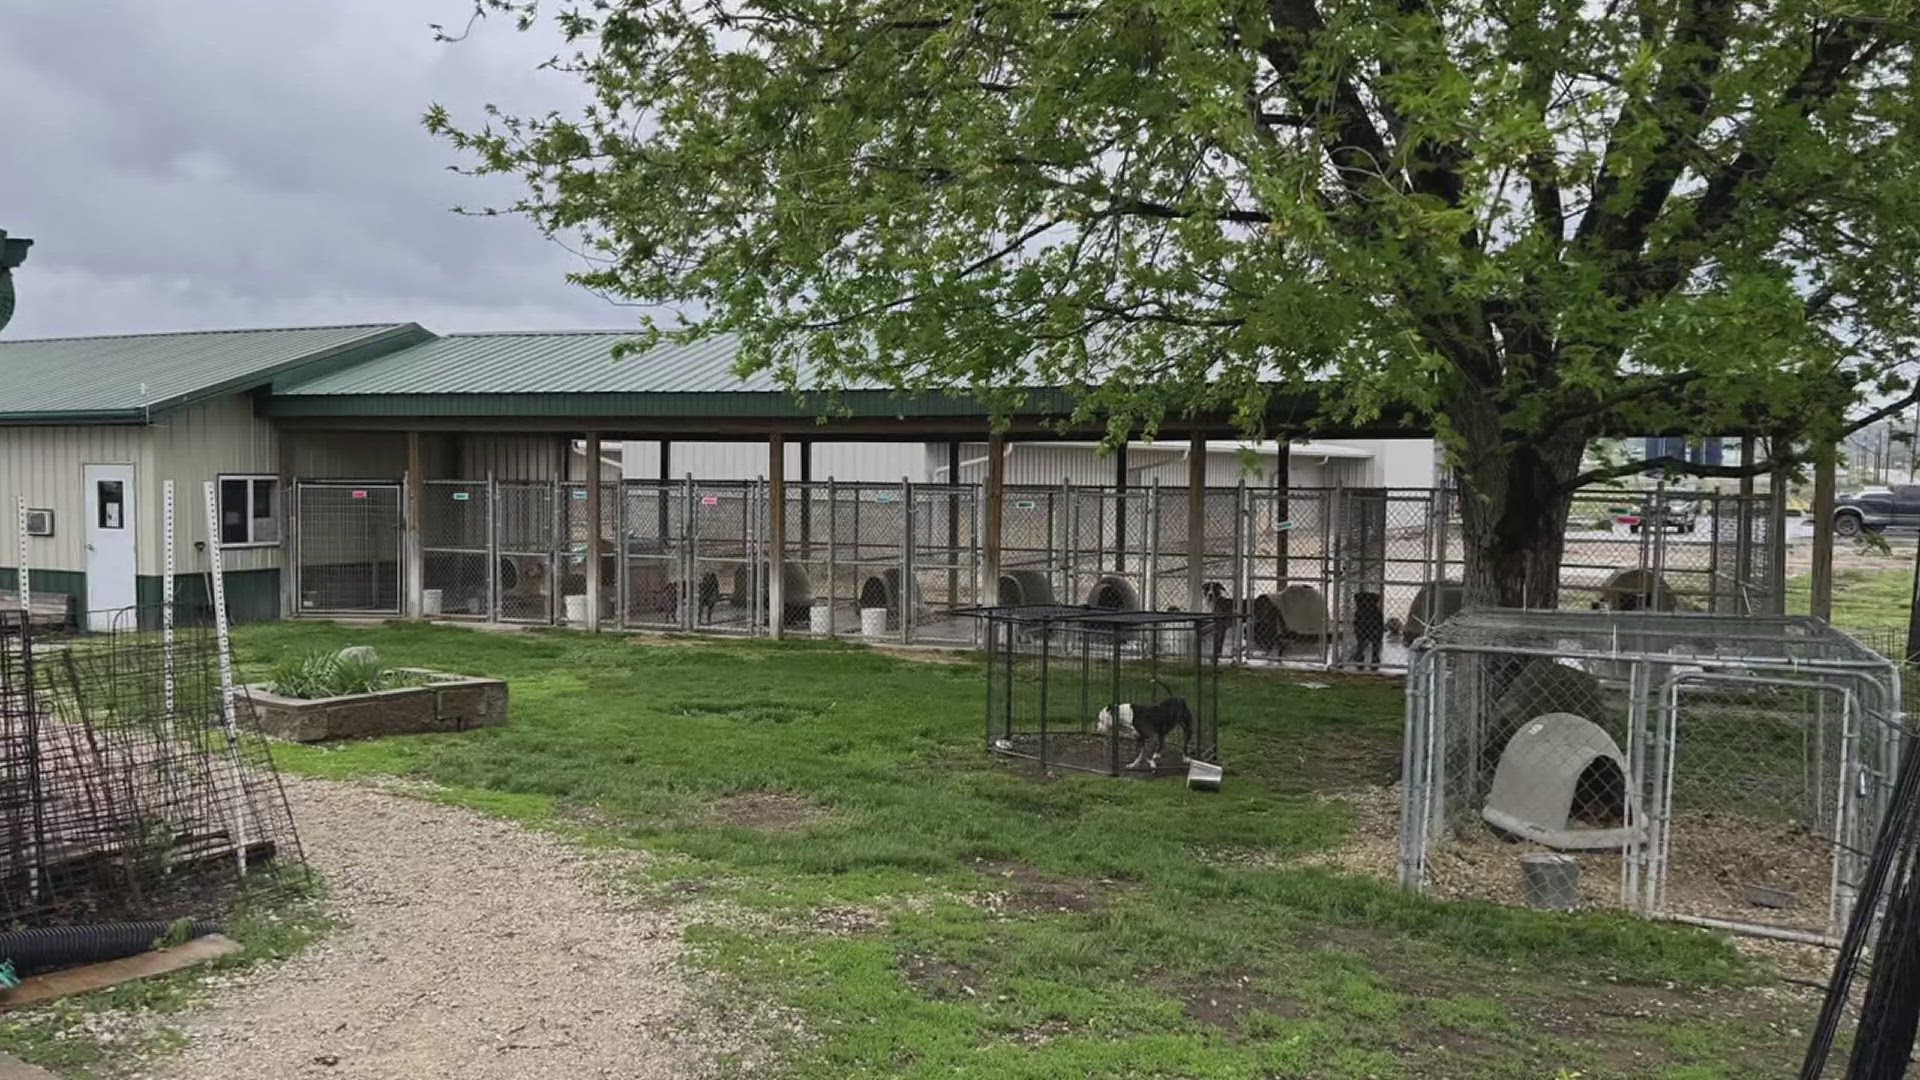 PAW Animal Shelter in Fort Madison, Iowa, was recently gifted a $750,000 matching challenge for a new shelter and is asking for the public's help in matching funds.